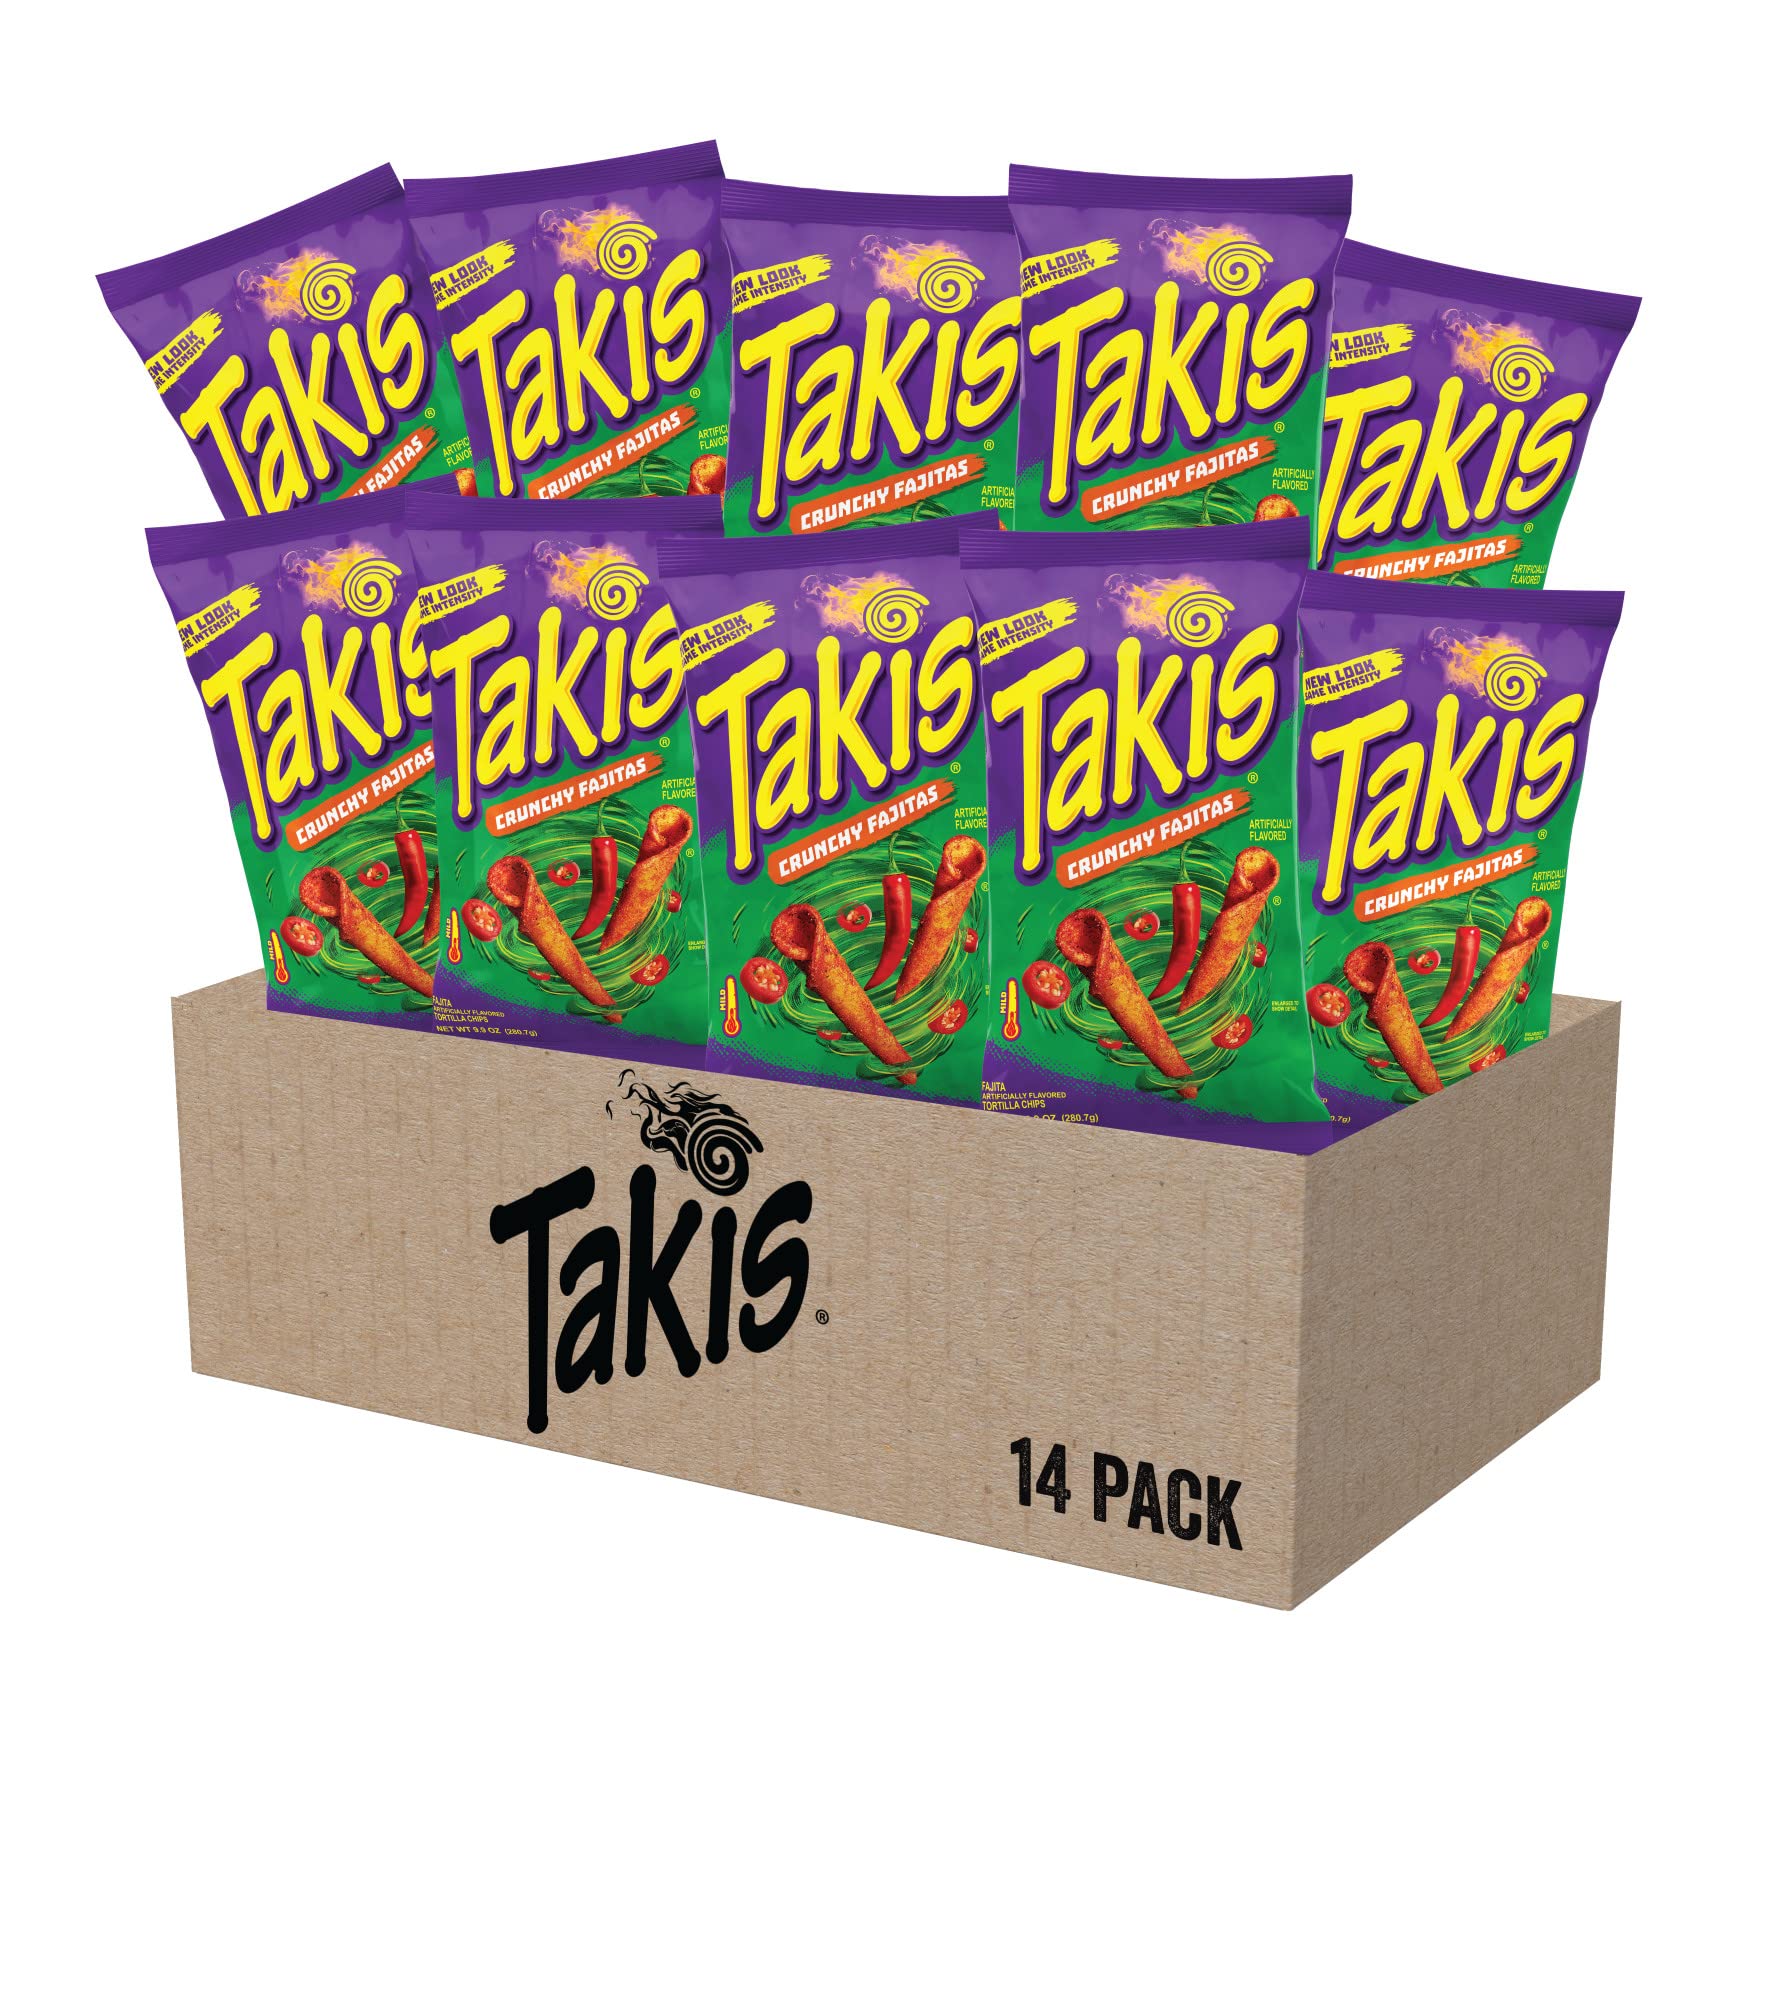 Takis Crunchy Fajitas Rolled Tortilla Chips, Fajita Artificially Flavored, Multipack Box with 14 Bags of 9.9 Ounces, Net Weight of 8 Pounds 10.6 Ou...